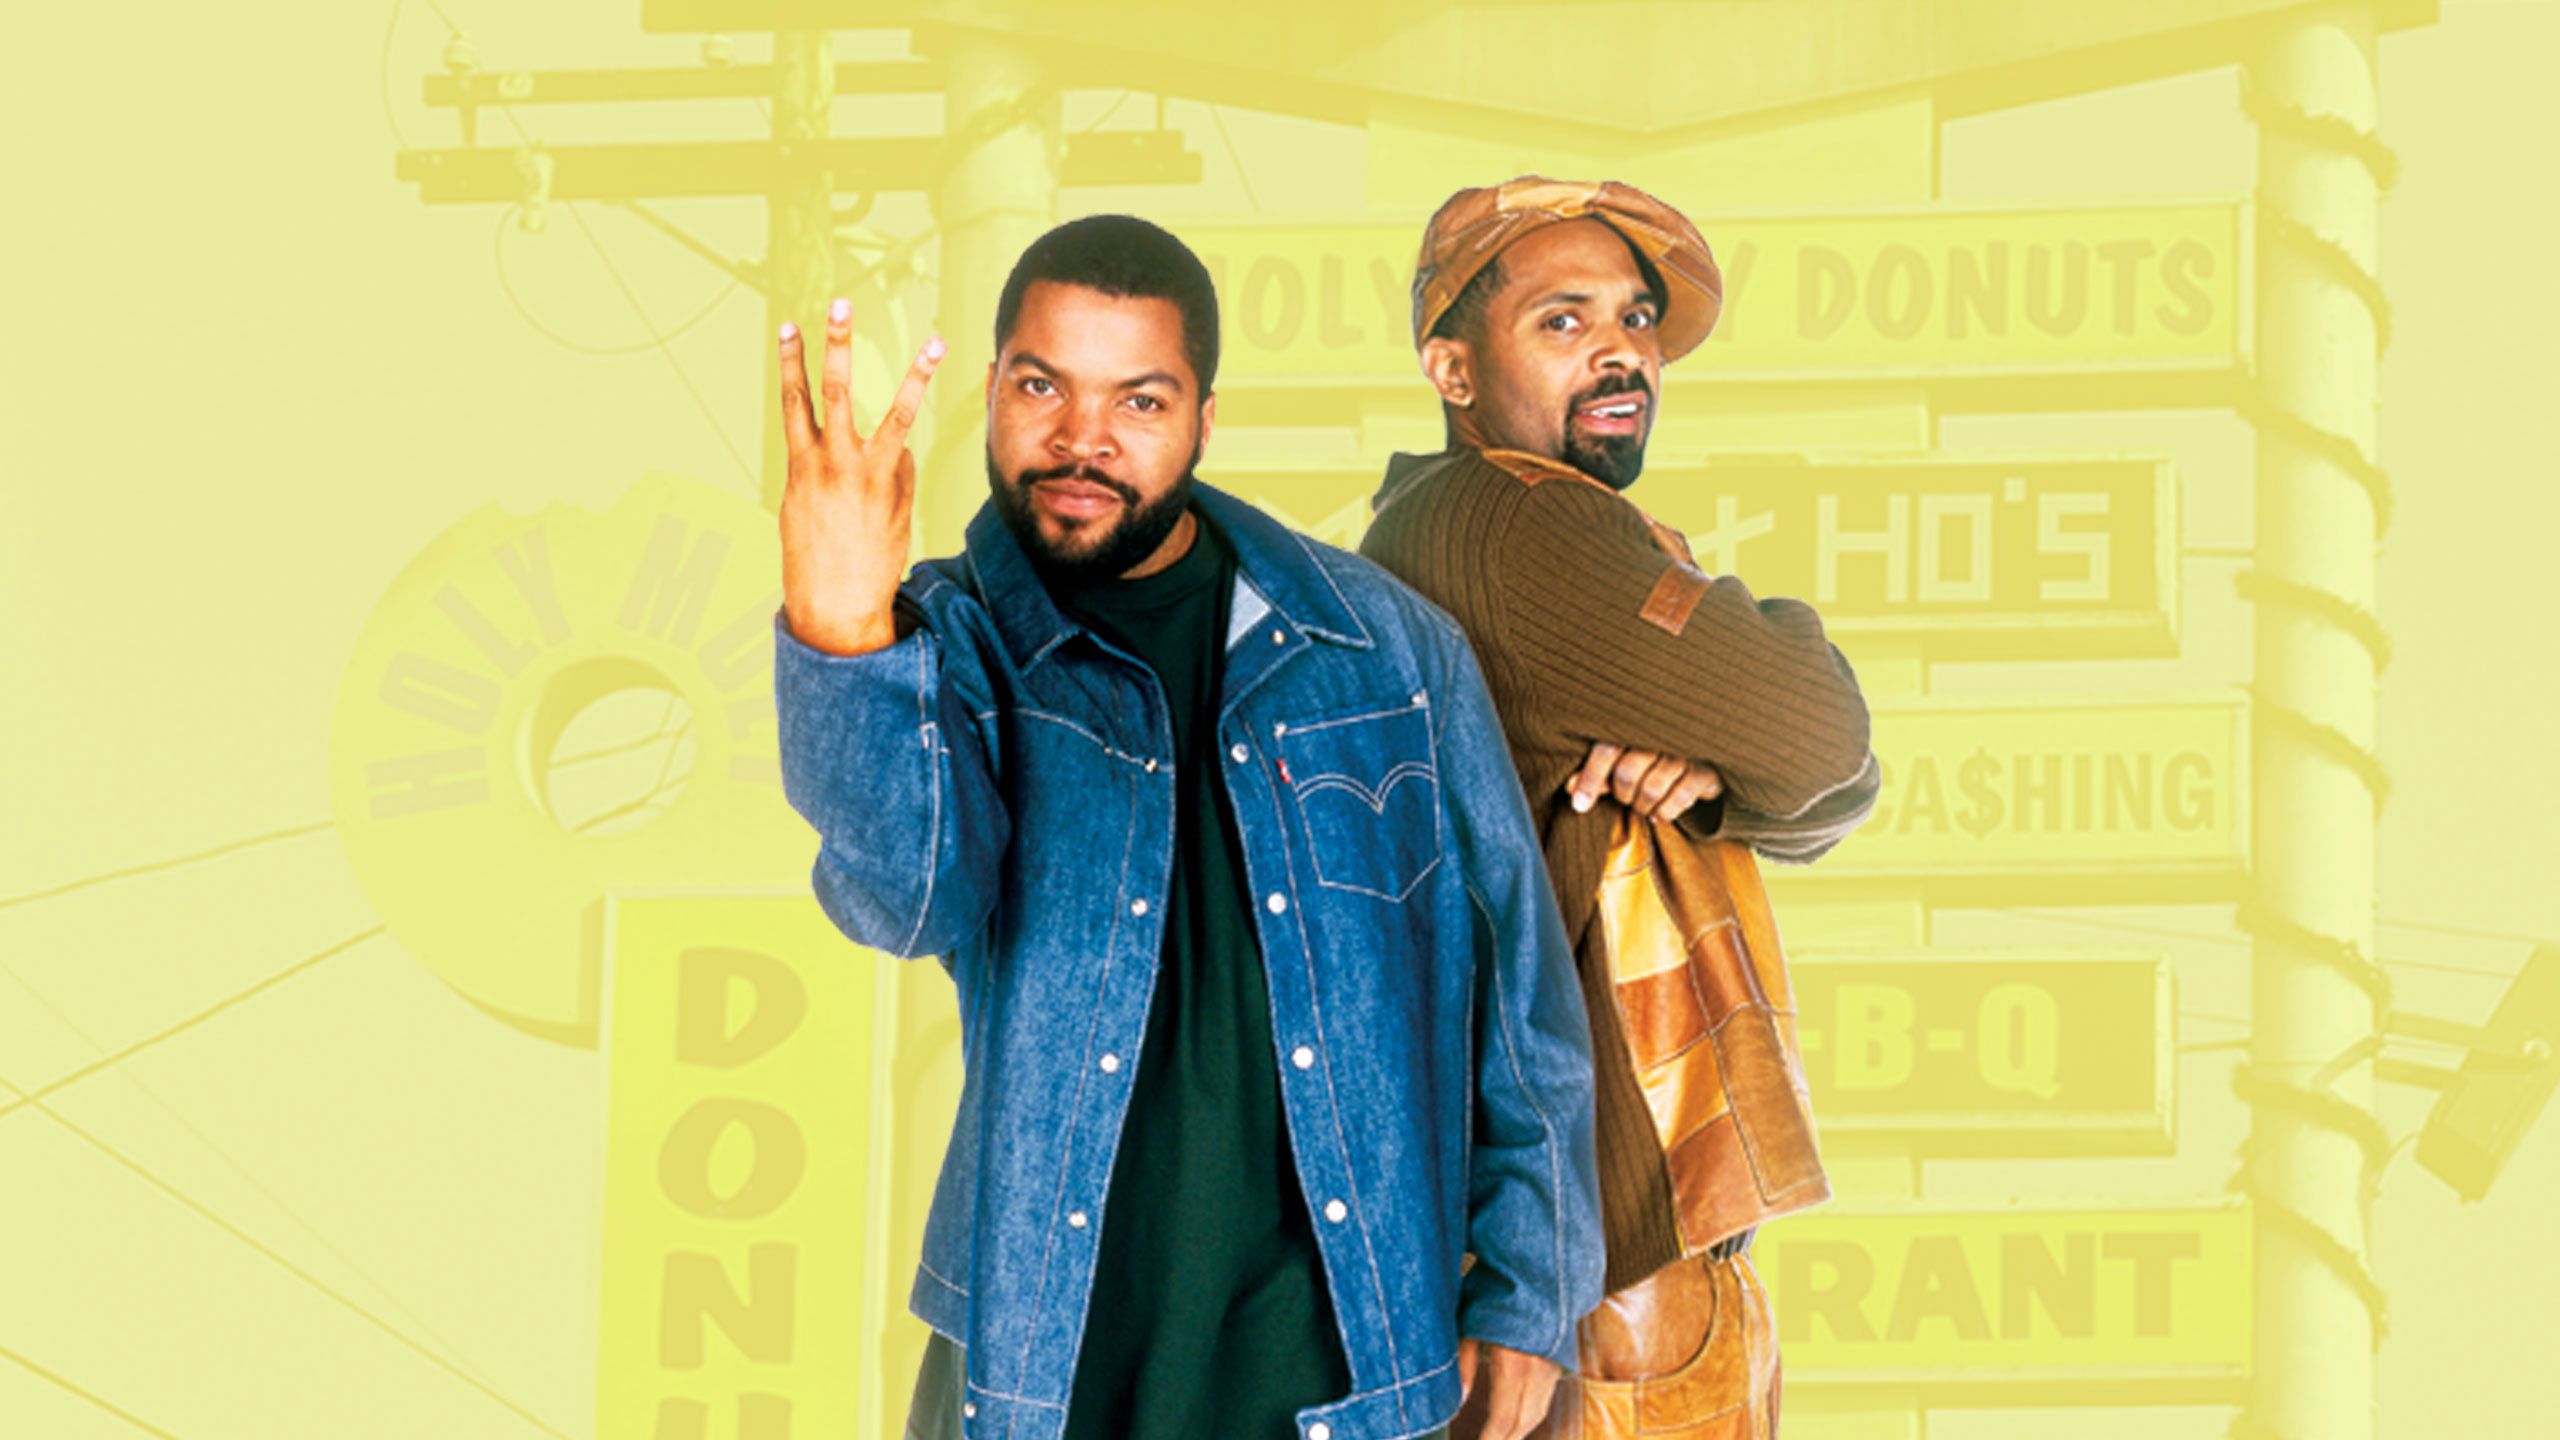 Friday After Next, Full Movie